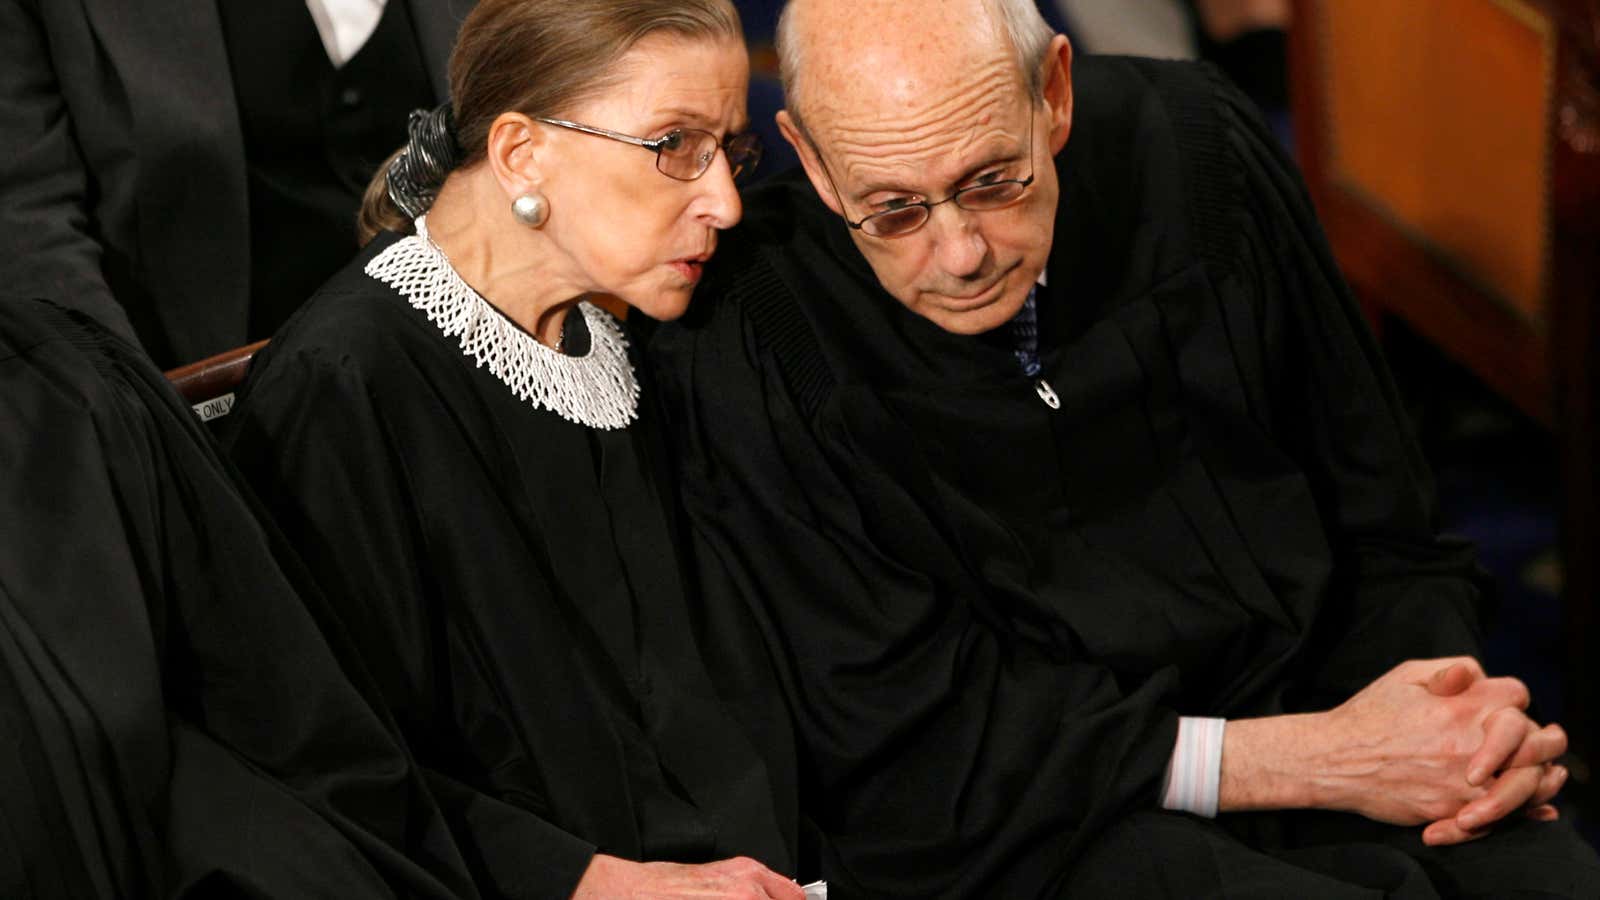 Ruth Bader Ginsburg and her fellow Clinton appointee Stephen Breyer.